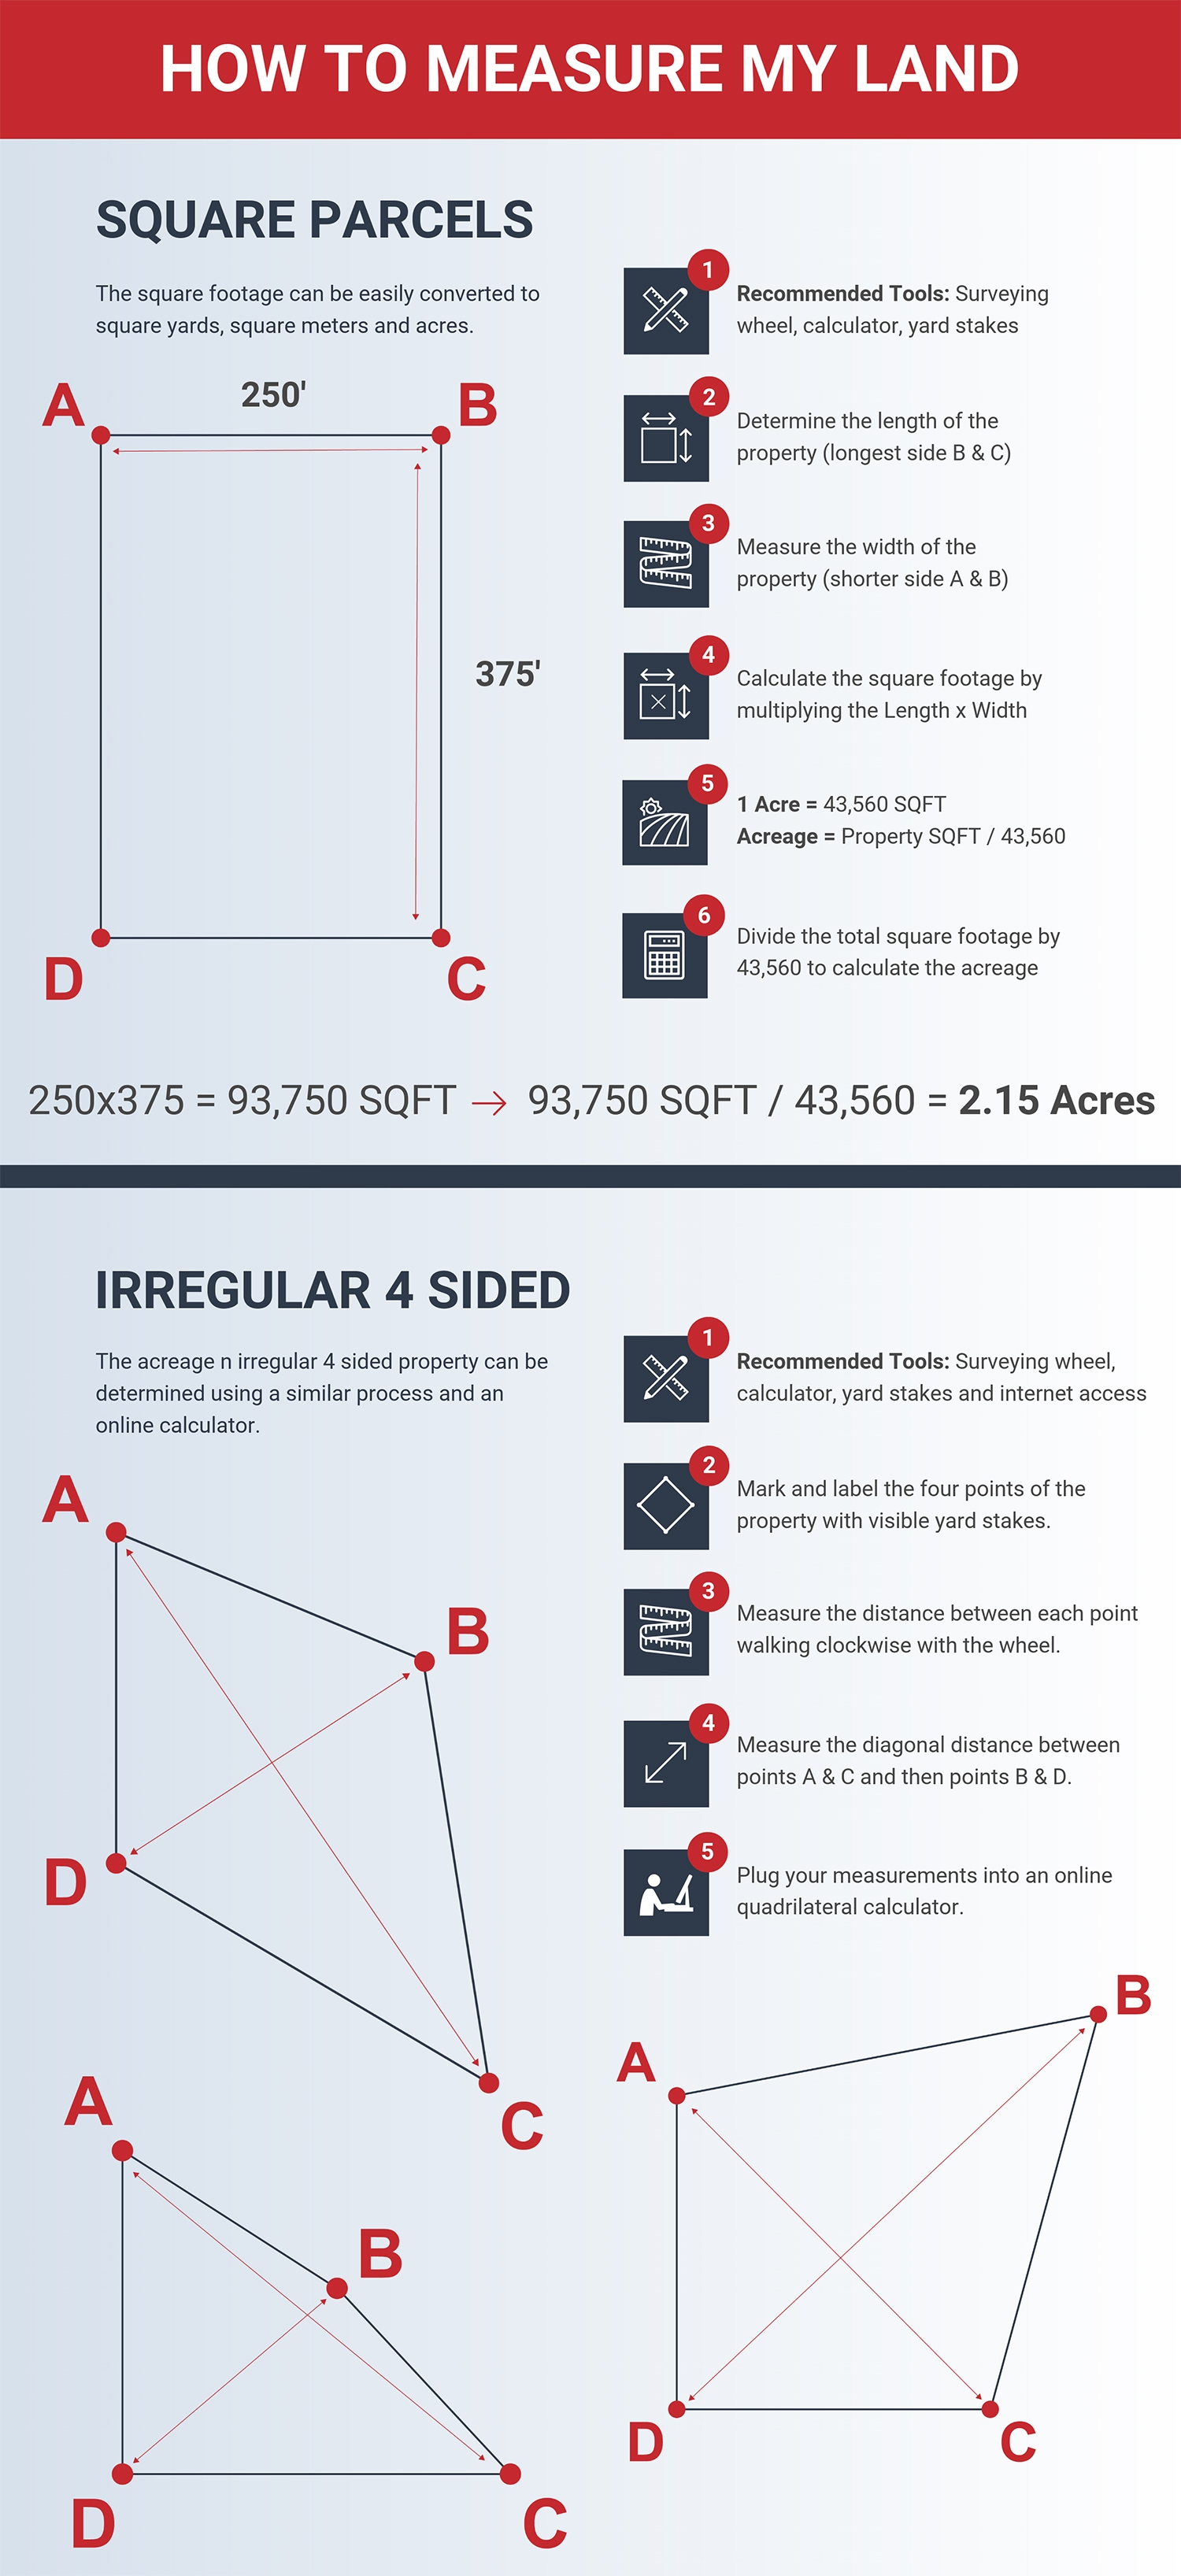 How to Measure My Land Infographic